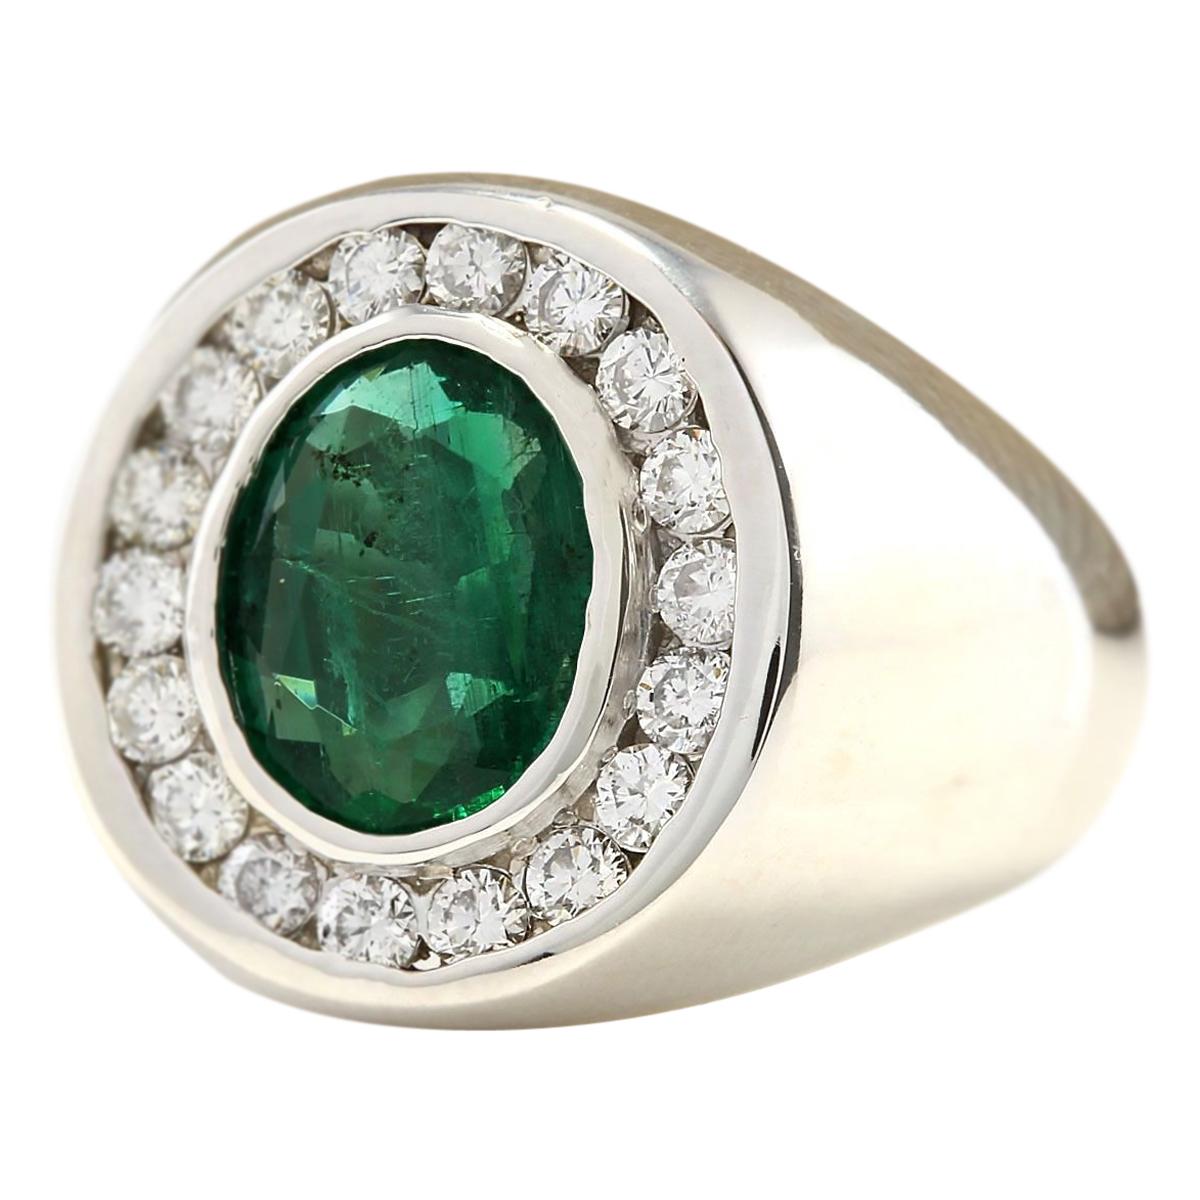 Introducing our distinguished Men's 14 Karat White Gold Diamond Ring, boasting a commanding 3.82 Carat Natural Emerald centerpiece, stamped for authenticity. Crafted with precision and elegance, this ring weighs 10.4 grams in total, symbolizing